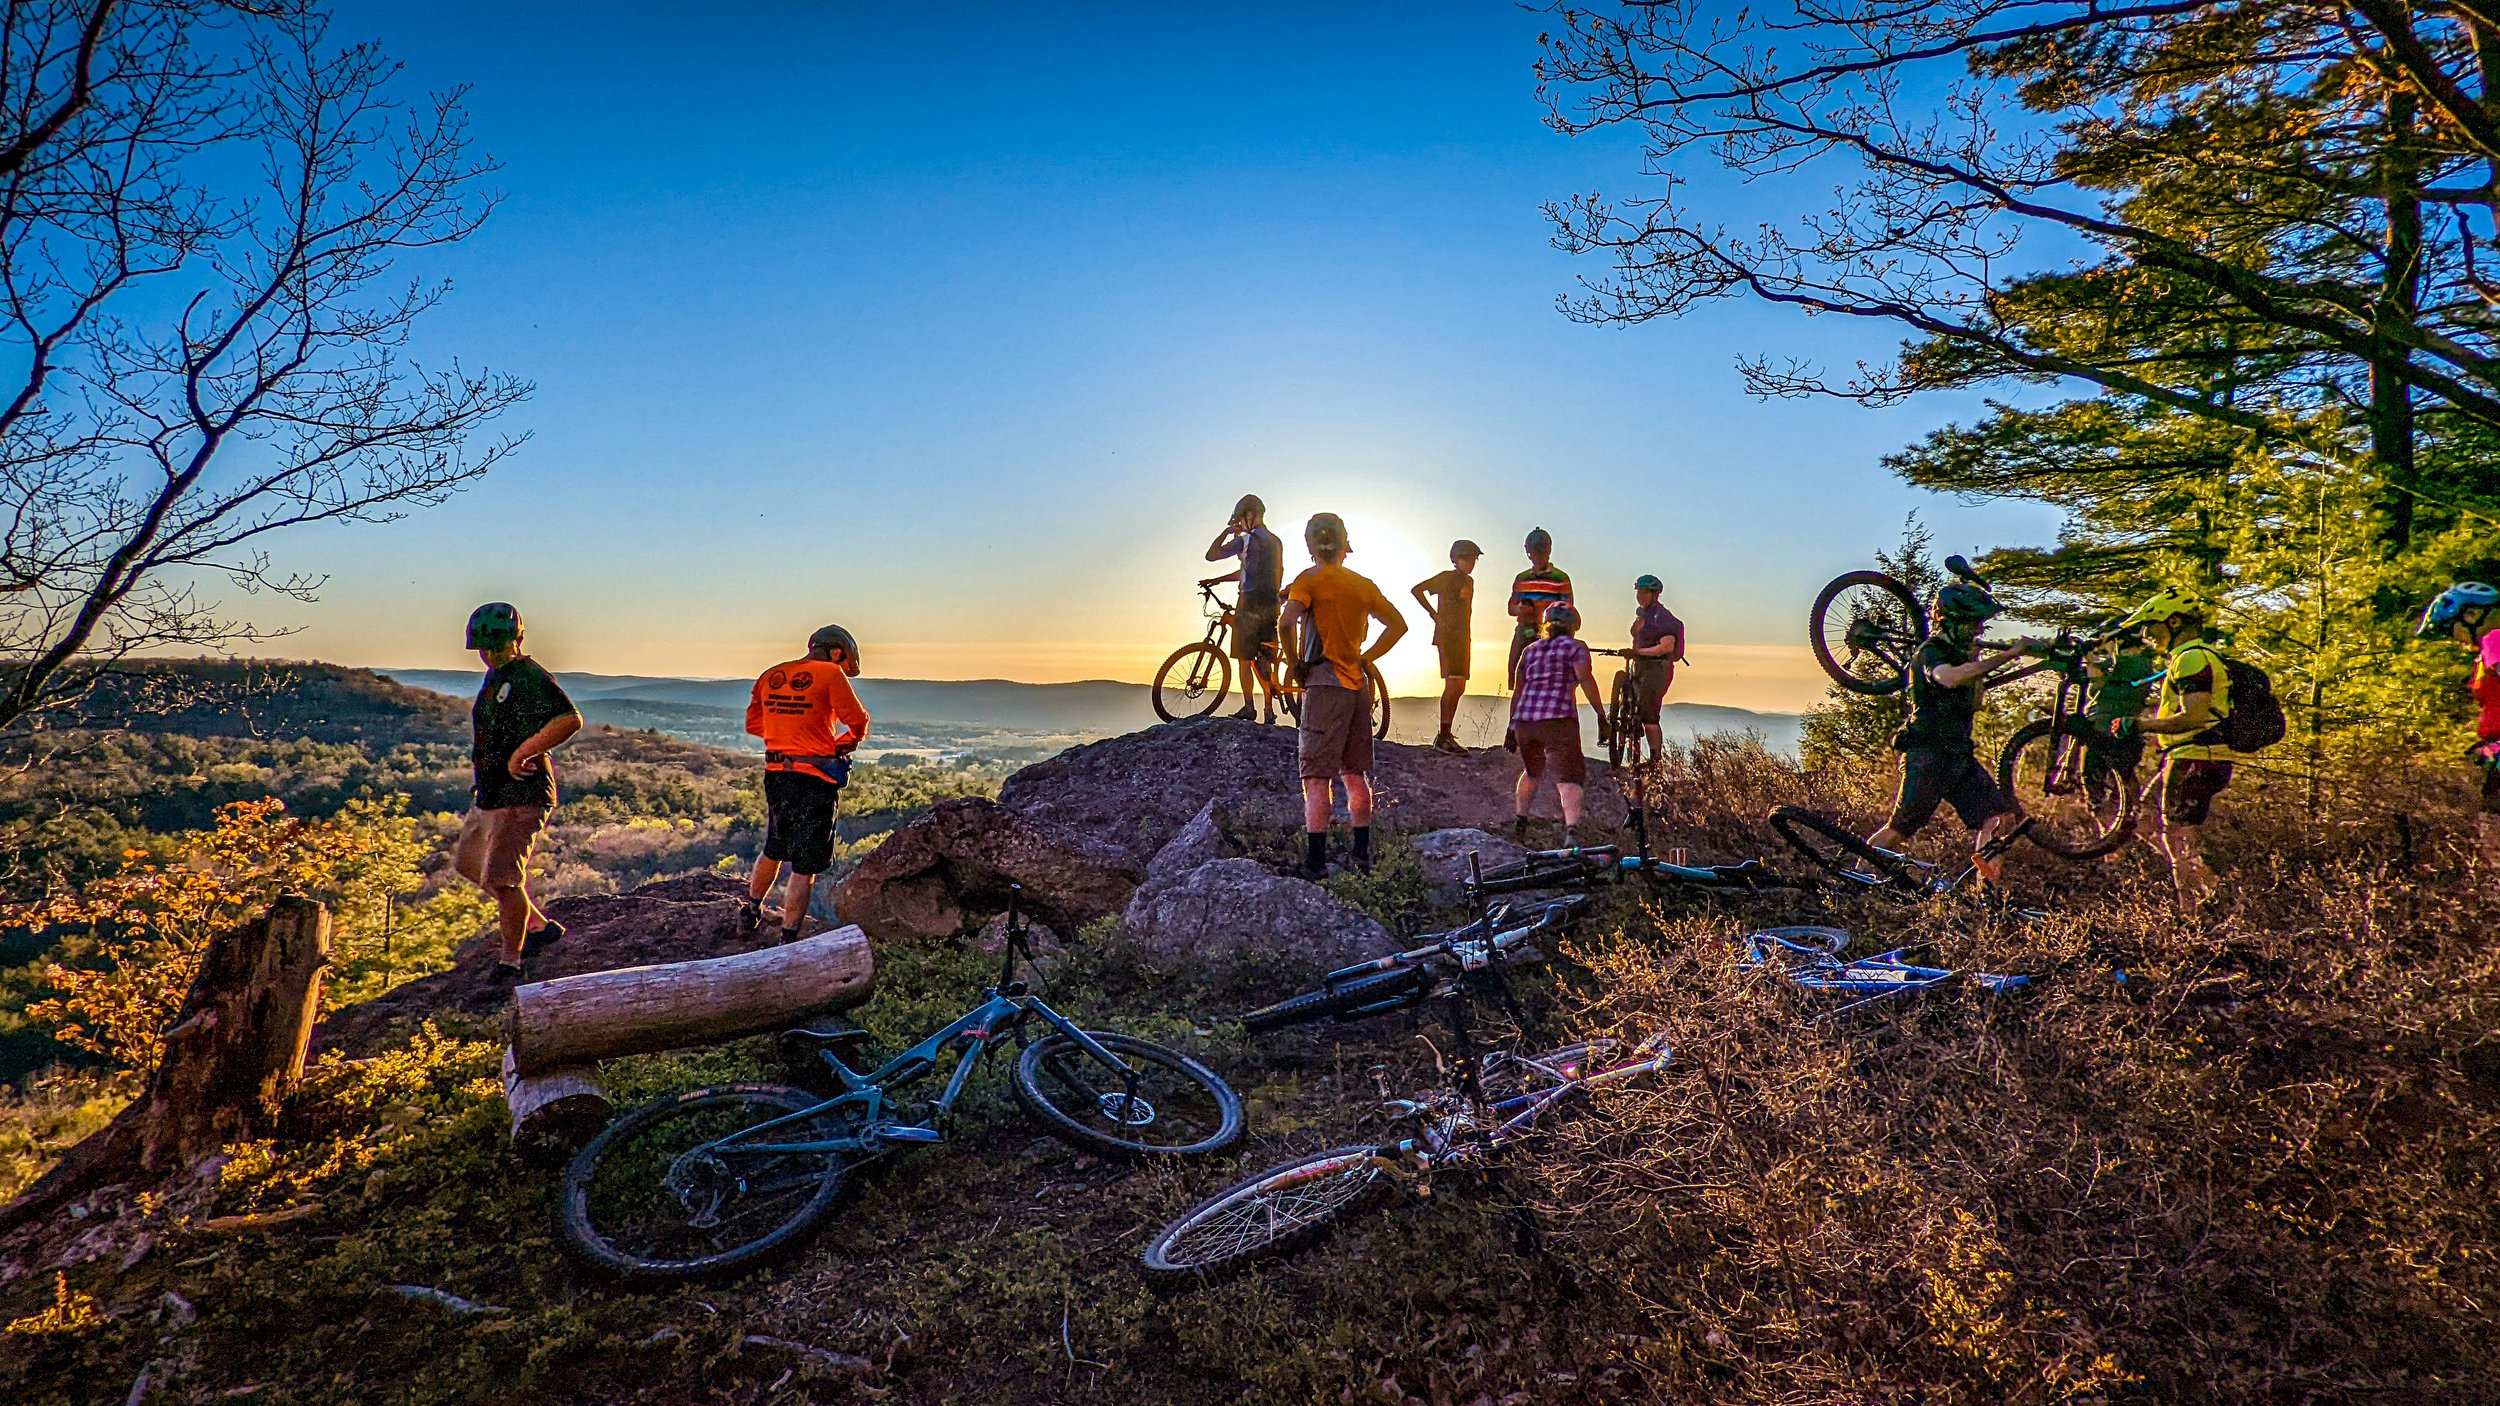 Group of cyclists standing on the edge of a large rocky hill overlooking scenic view.